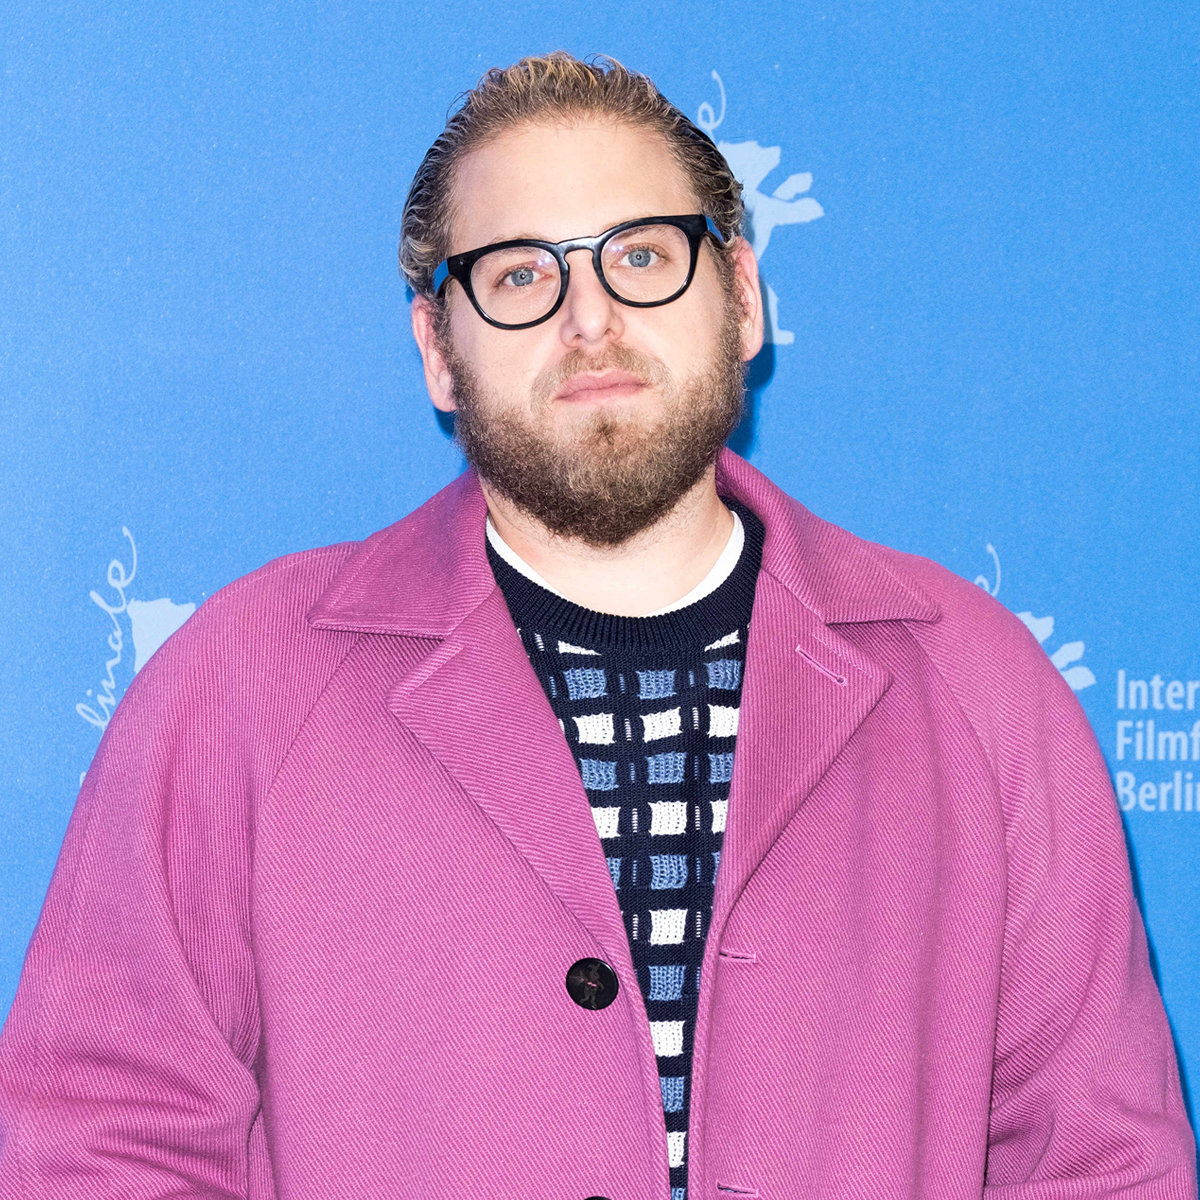 Jonah Hill shows off his guns in Phoenix Suns jersey tucked into trousers  while out in New York